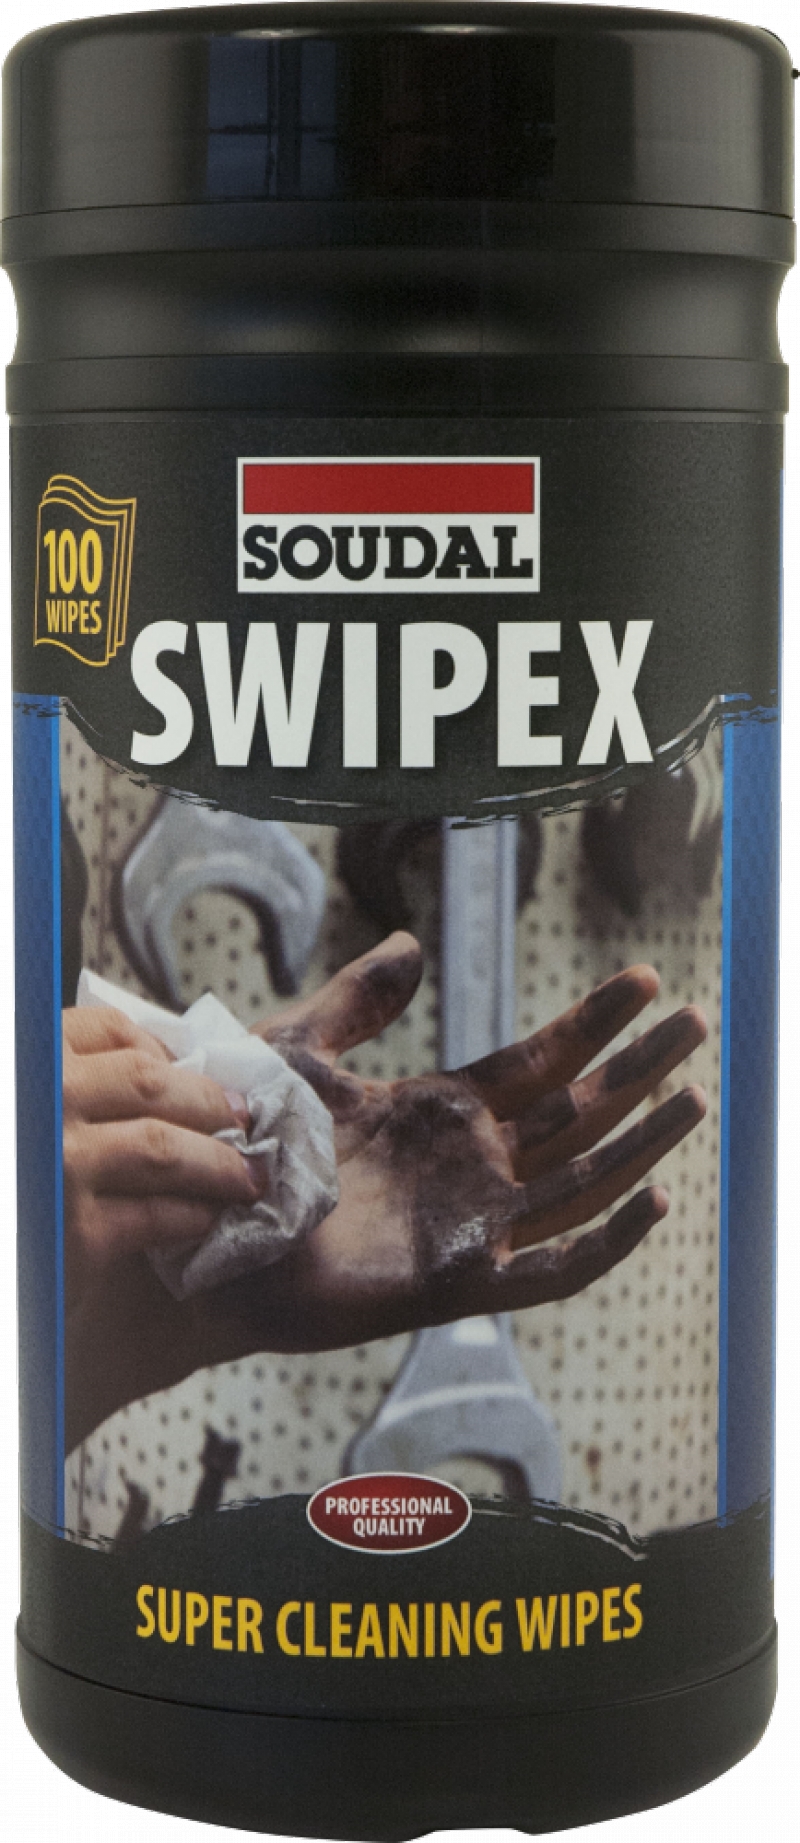 Soudal super cleaning wipes